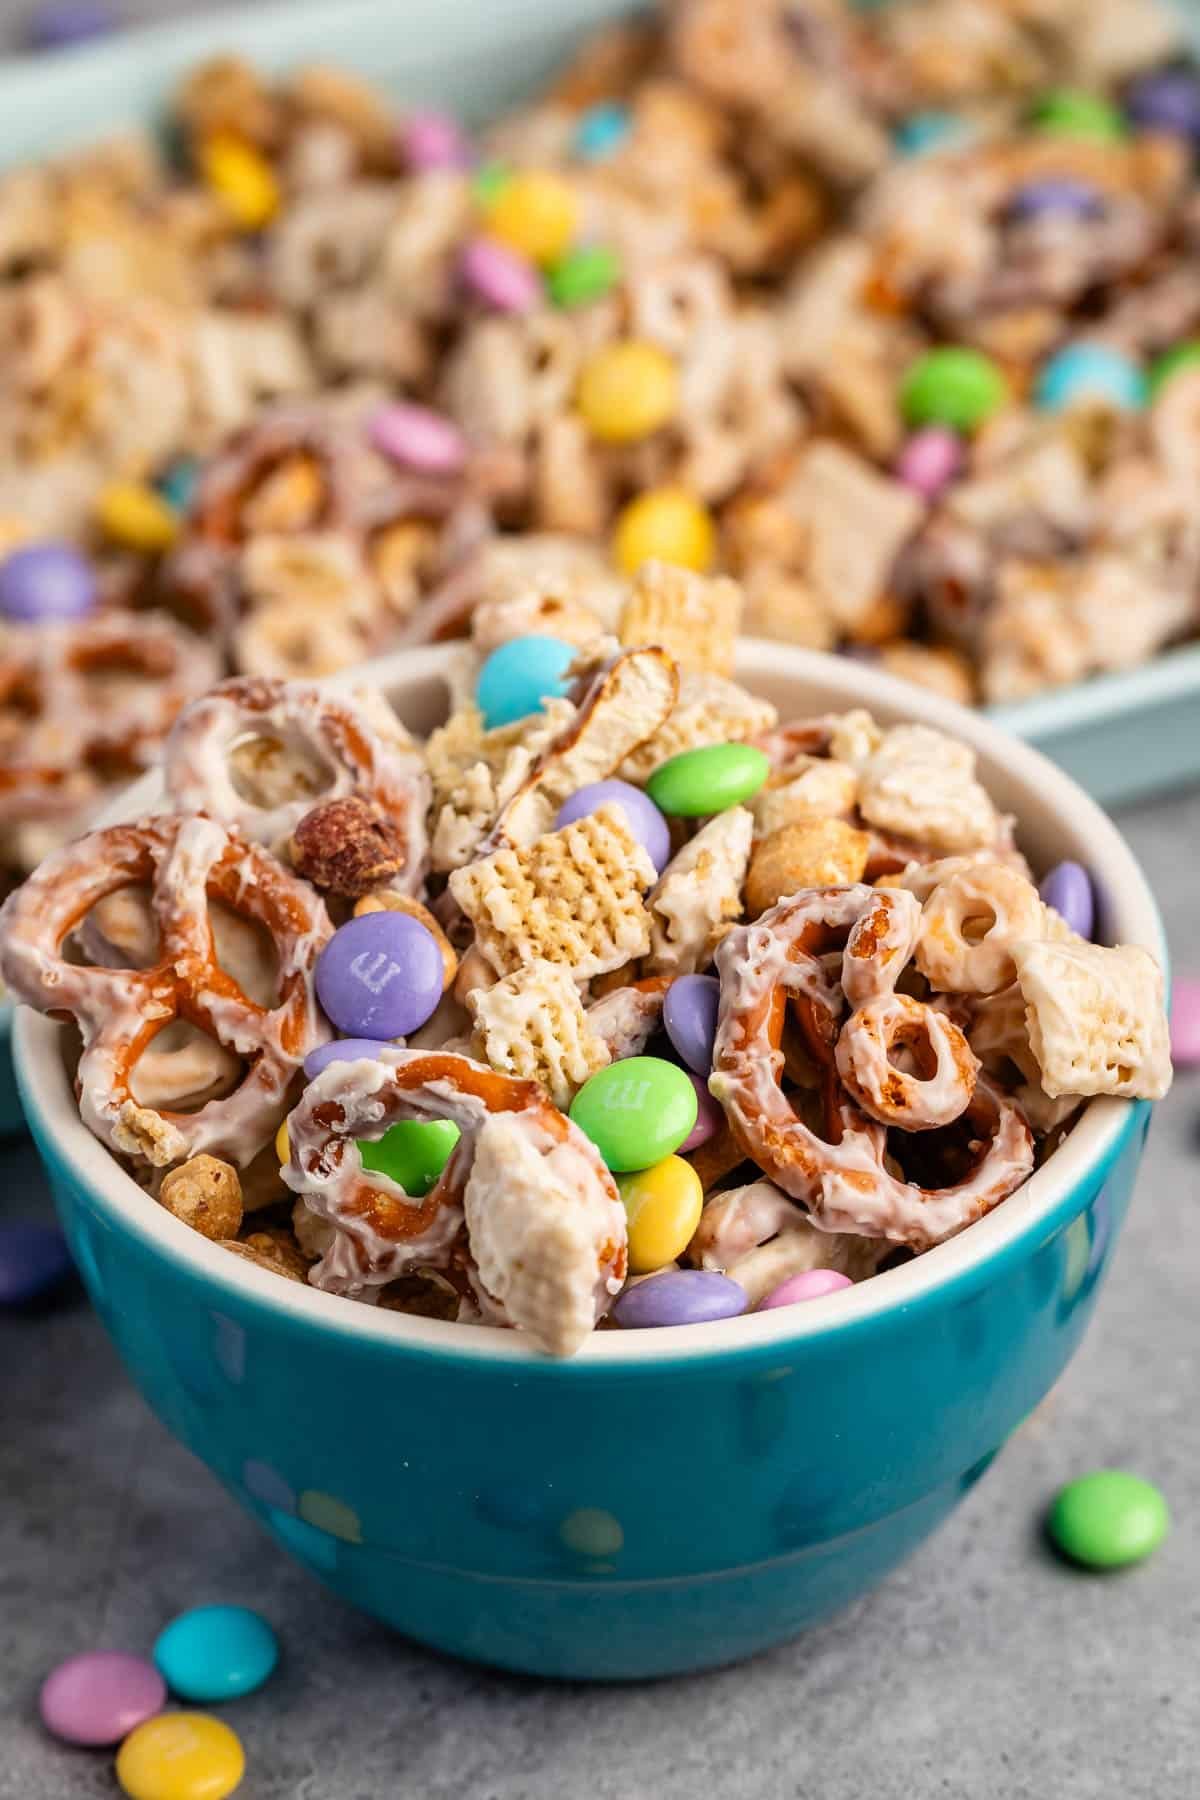 bunny munch mixed in a teal bowl with white chocolate.